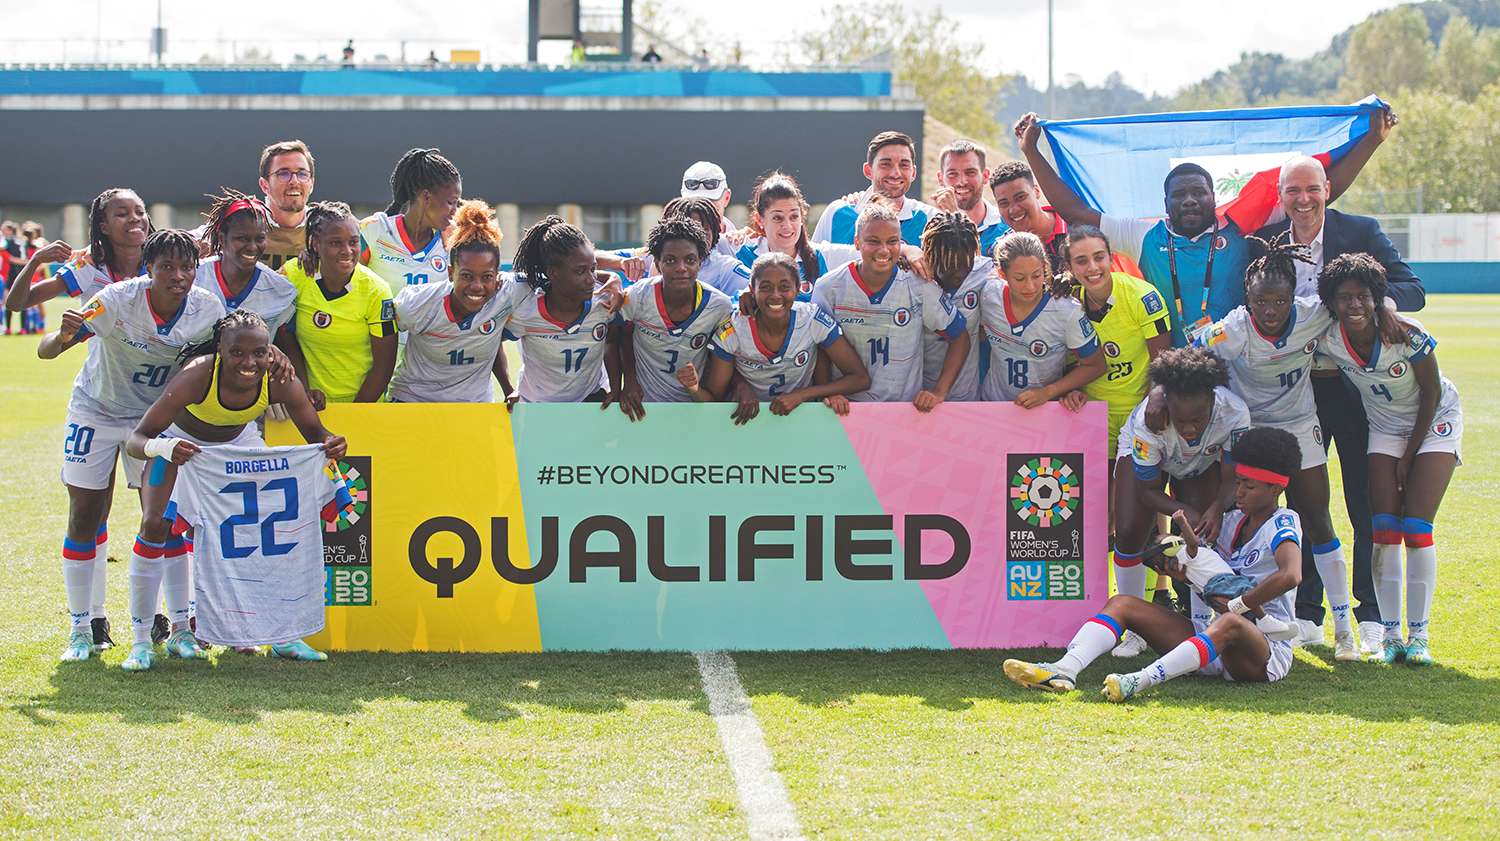 A team of women in uniforms and some men pose on a soccer field with a banner that says qualified.